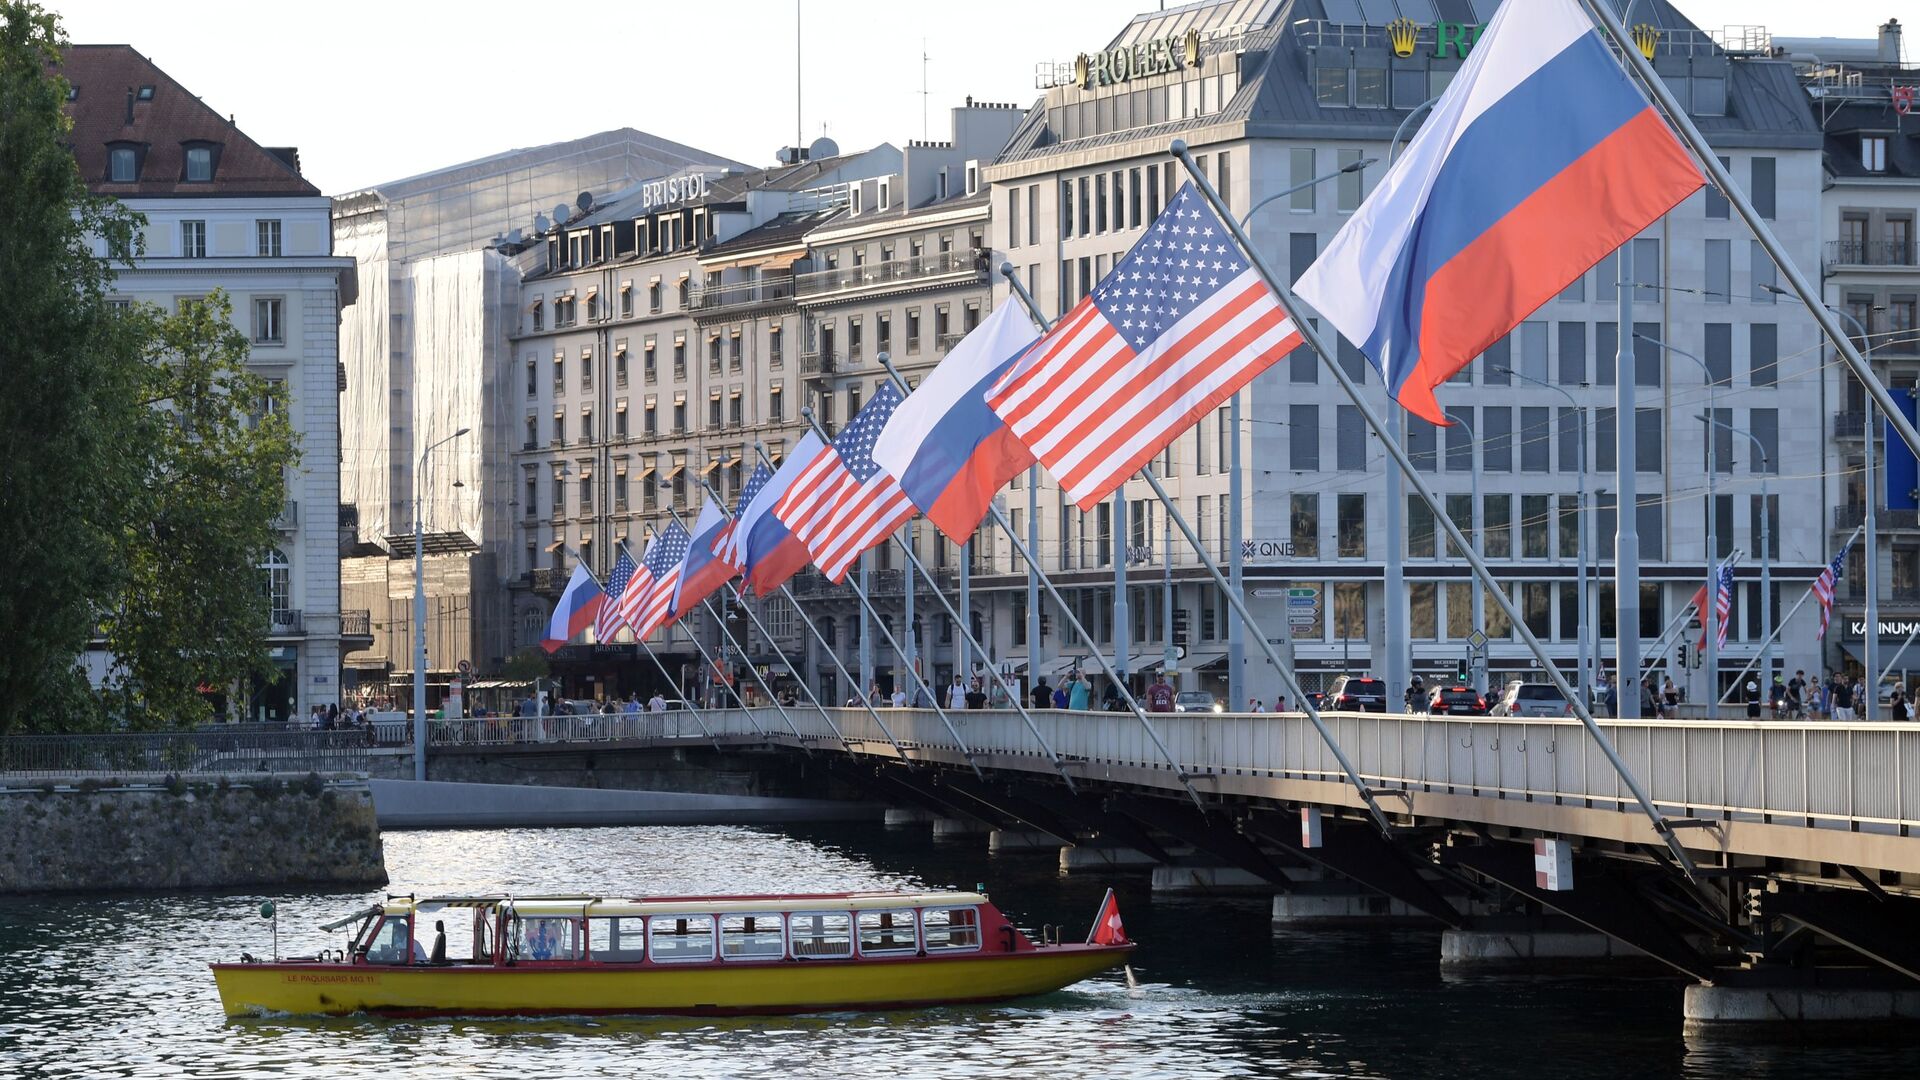 A view shows Mont-Blanc bridge decorated with flags of the USA and Russia ahead of the June 16 summit between U.S. President Joe Biden and Russian President Vladimir Putin, in Geneva, Switzerland - Sputnik International, 1920, 16.06.2021